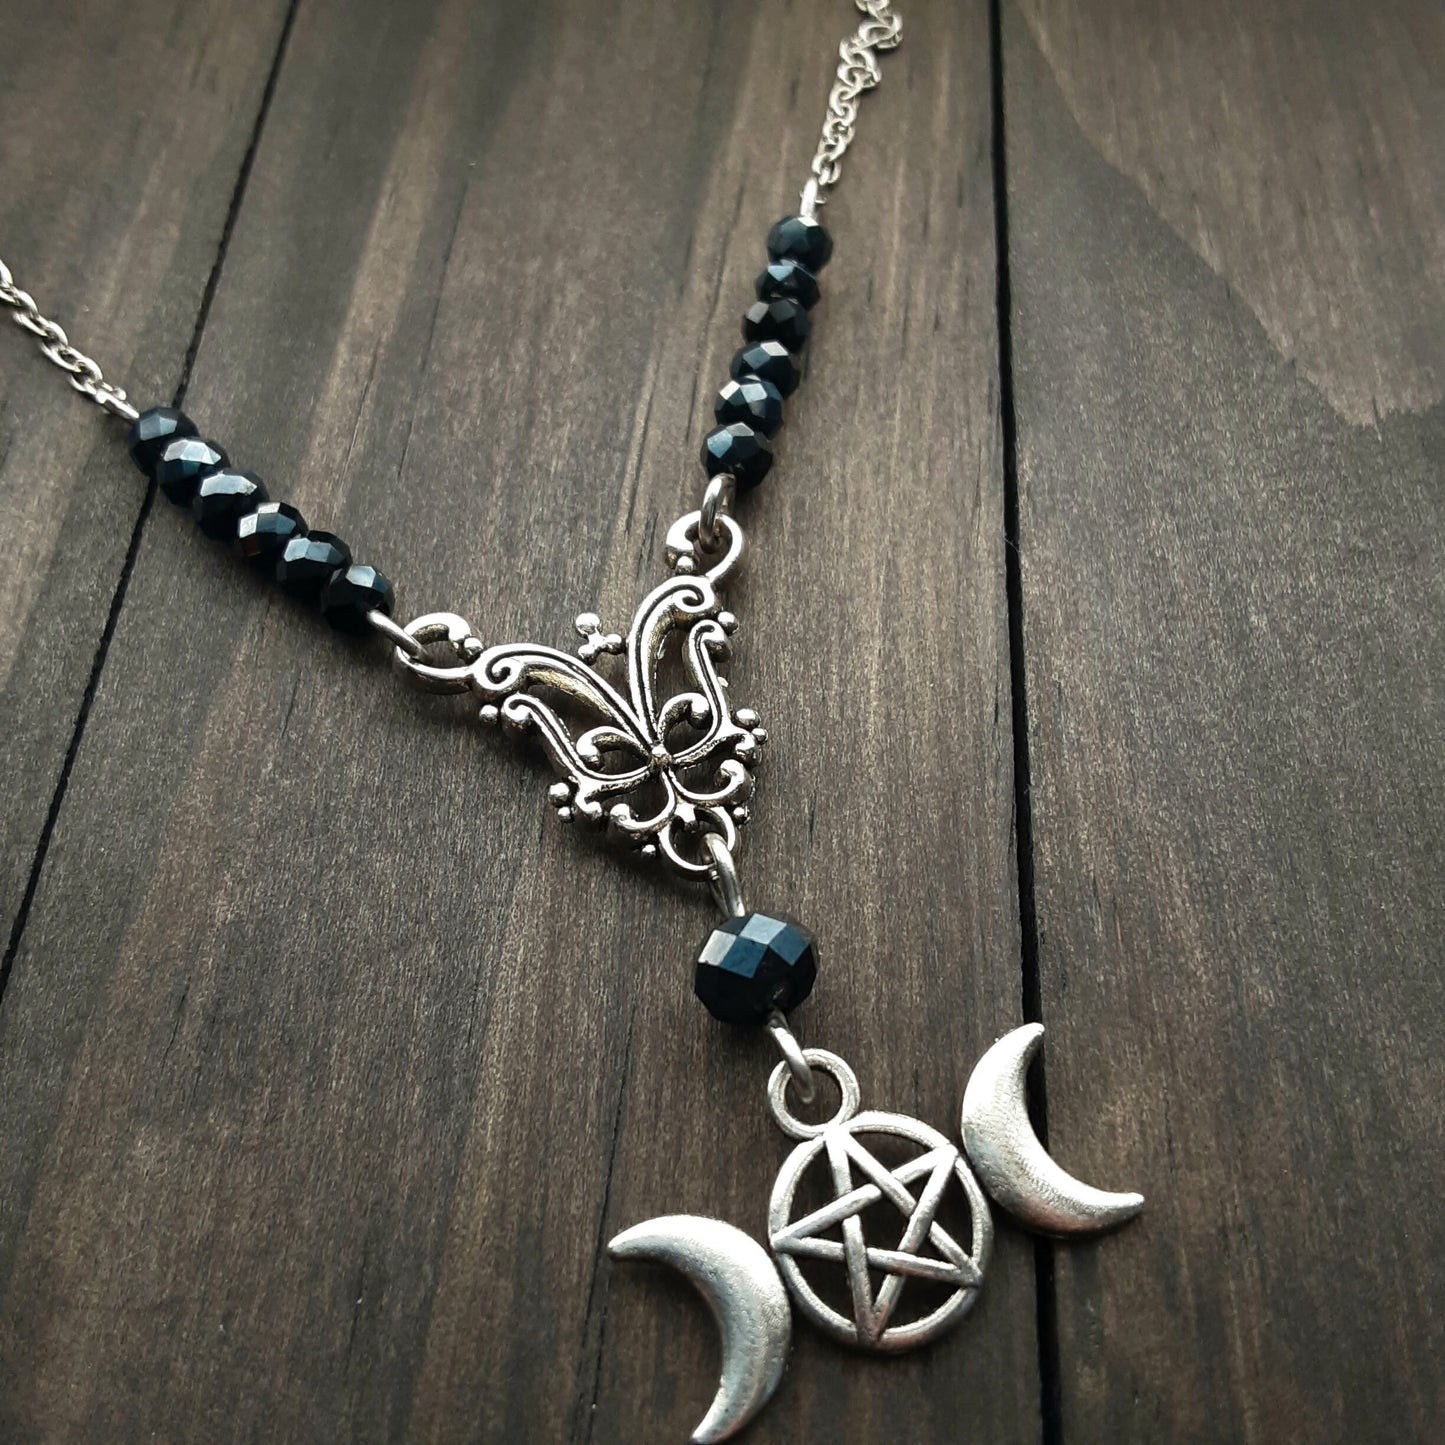 Hekate Necklace Triple Moon Goddess Gothic Jewelry Adjustable Witch Jewelry  Black crystal beaded